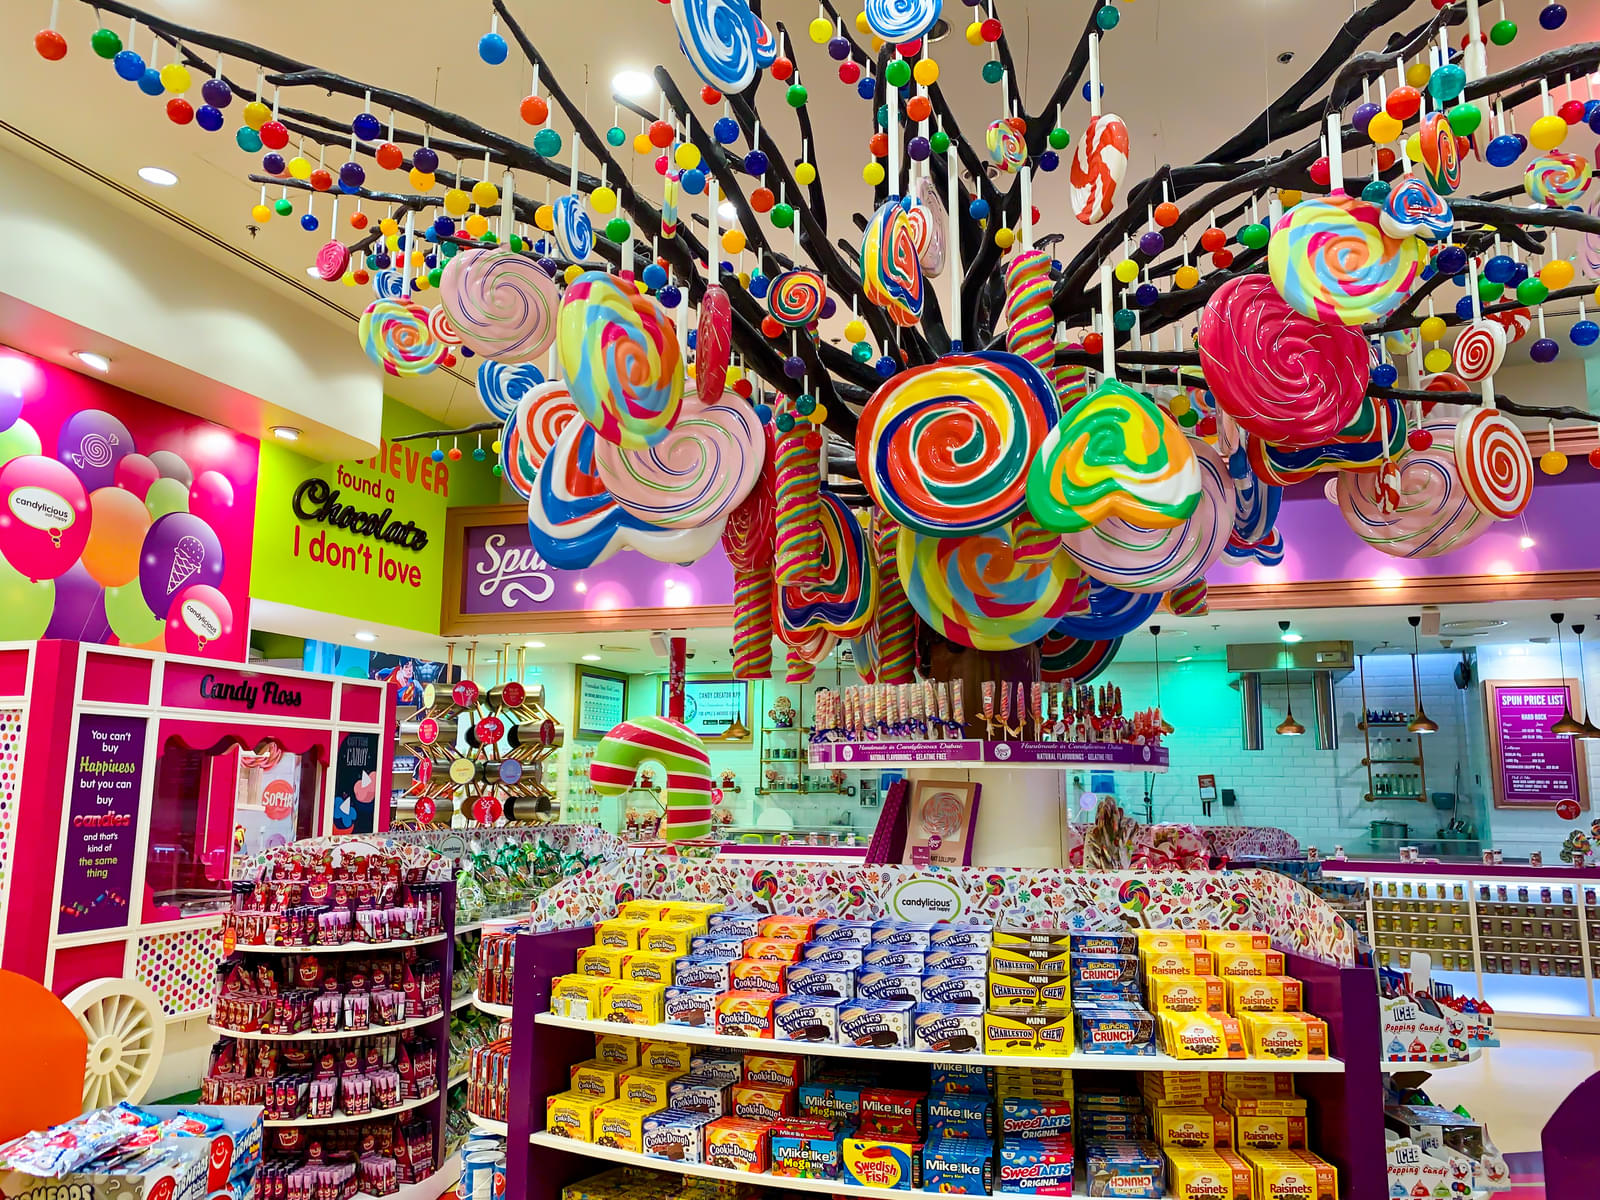 Explore the largest candy store in Dubai